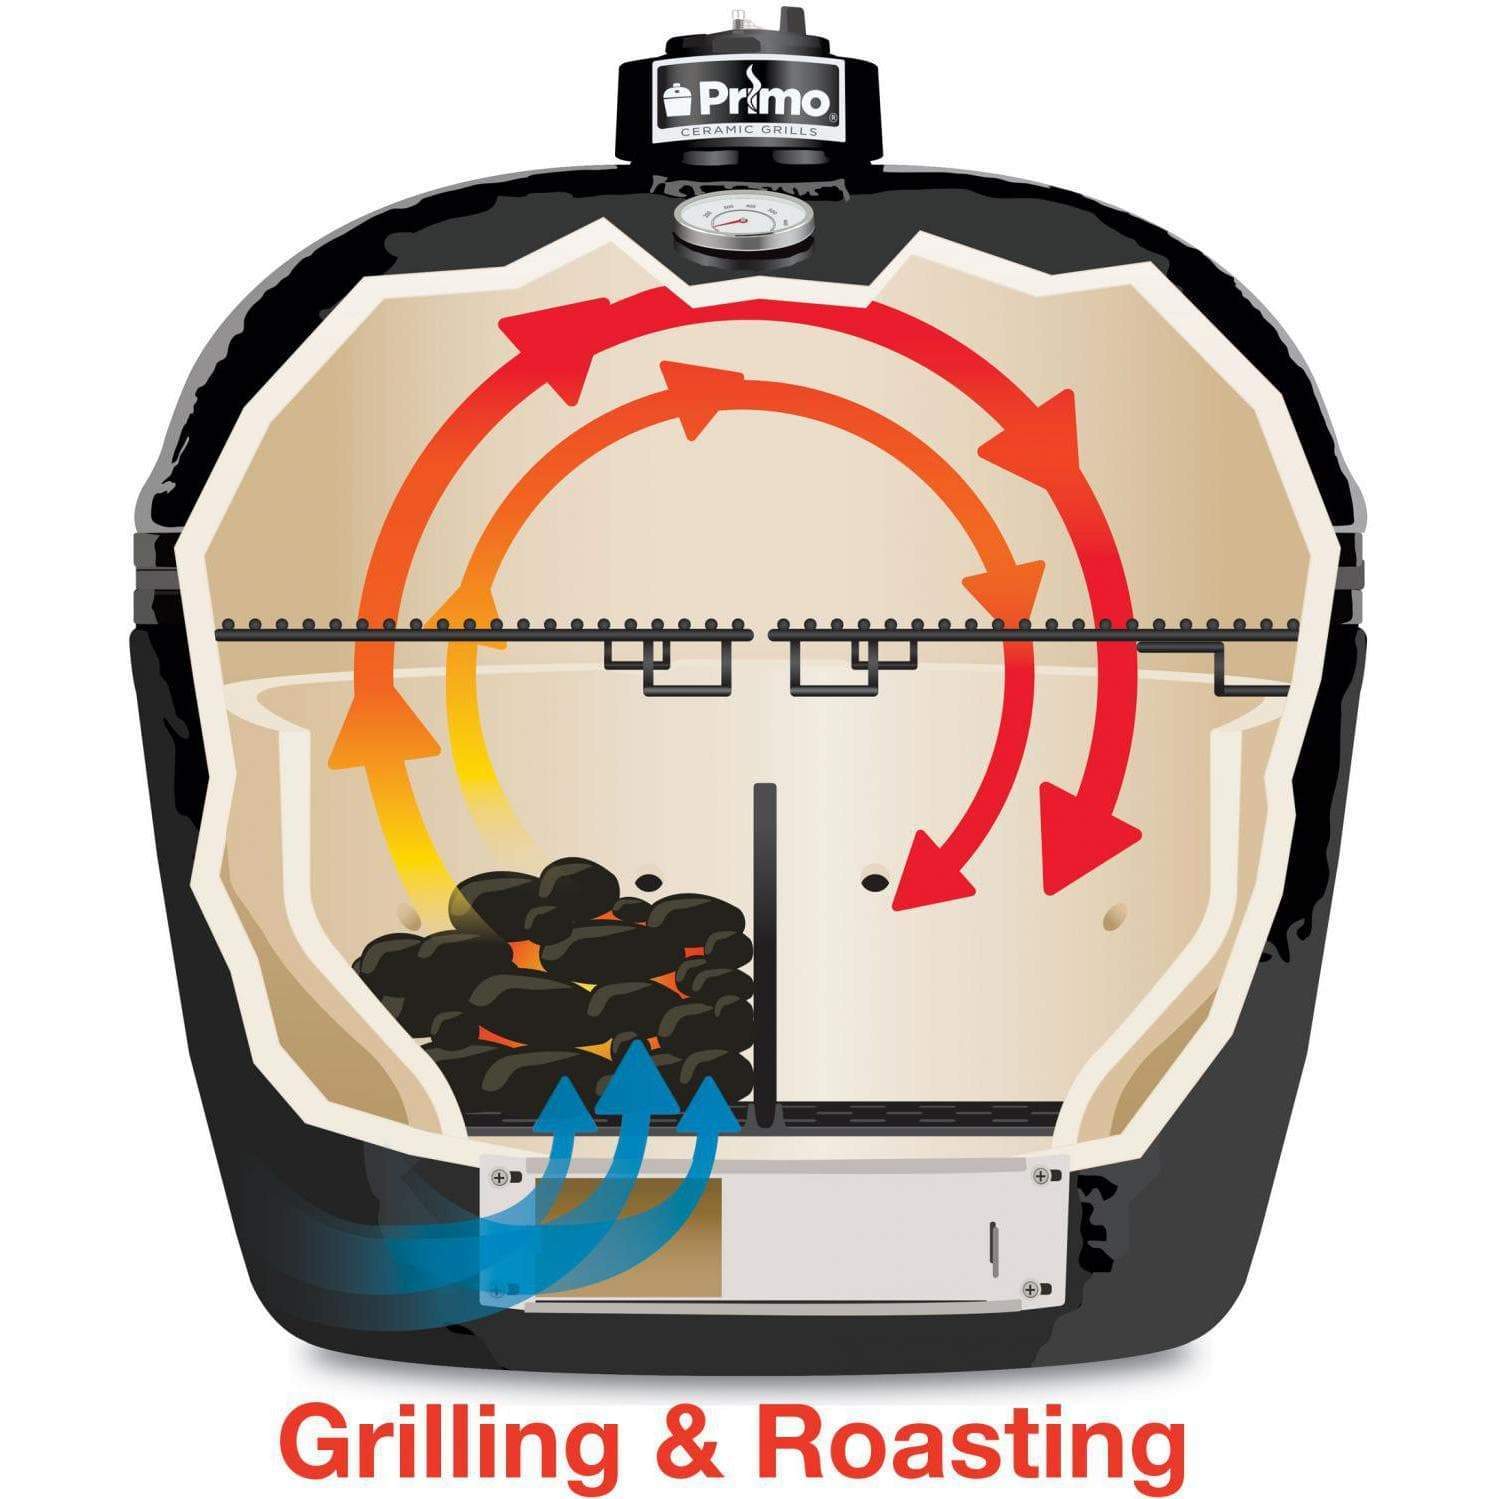 Primo Grills Kamado Grill Charcoal Primo Grills Oval XL 400 - Jack Daniel’s Edition